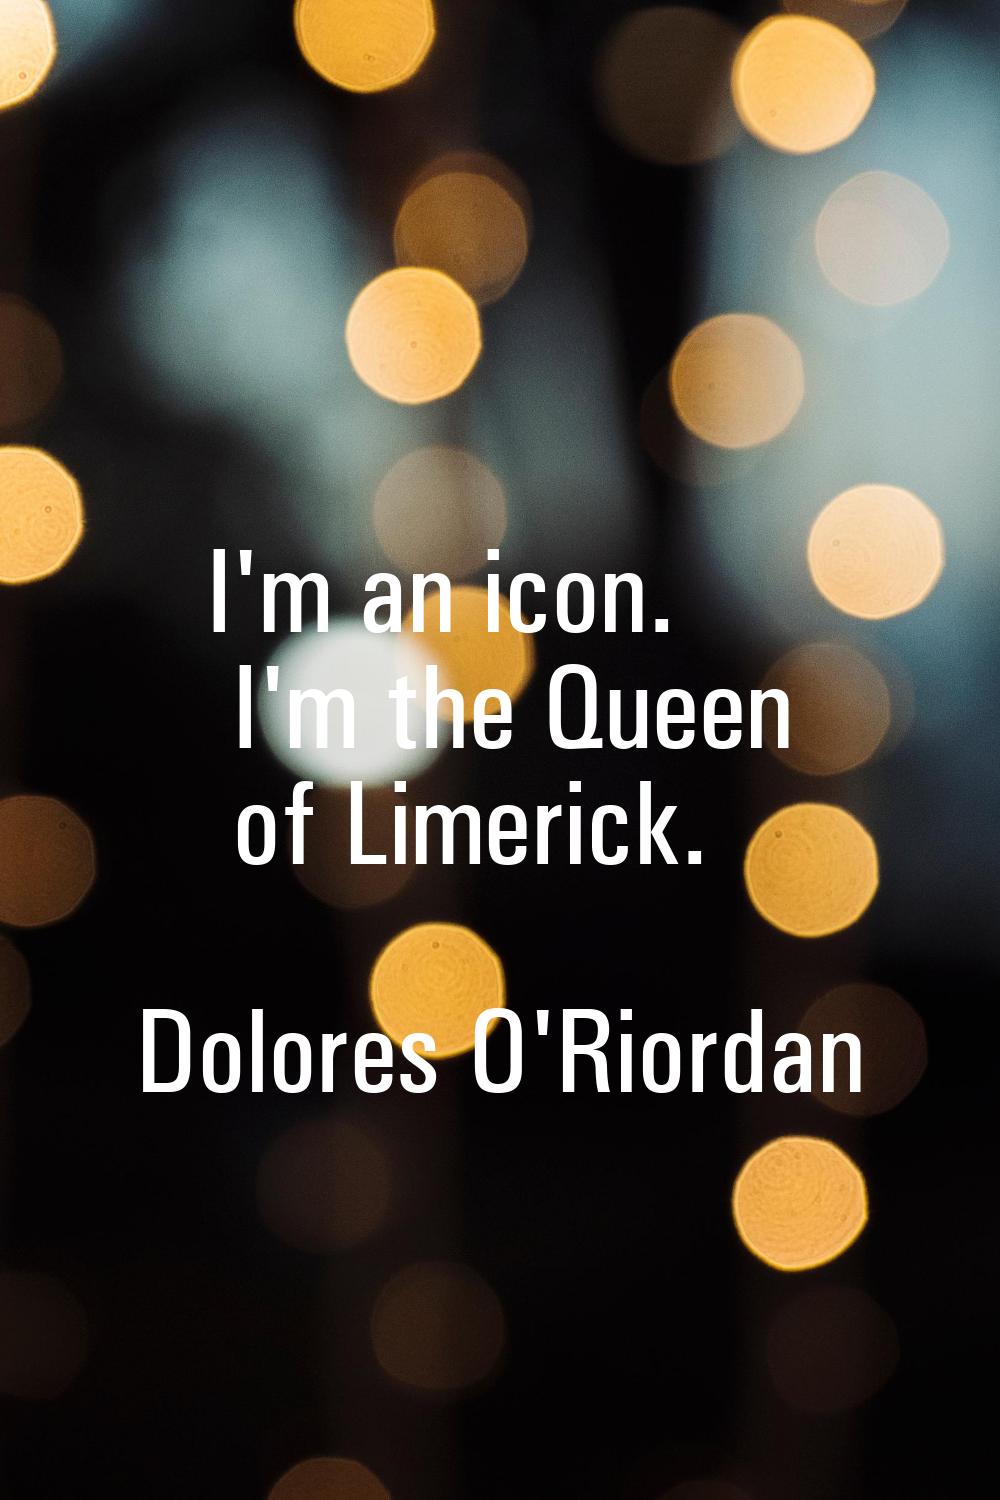 I'm an icon. I'm the Queen of Limerick.